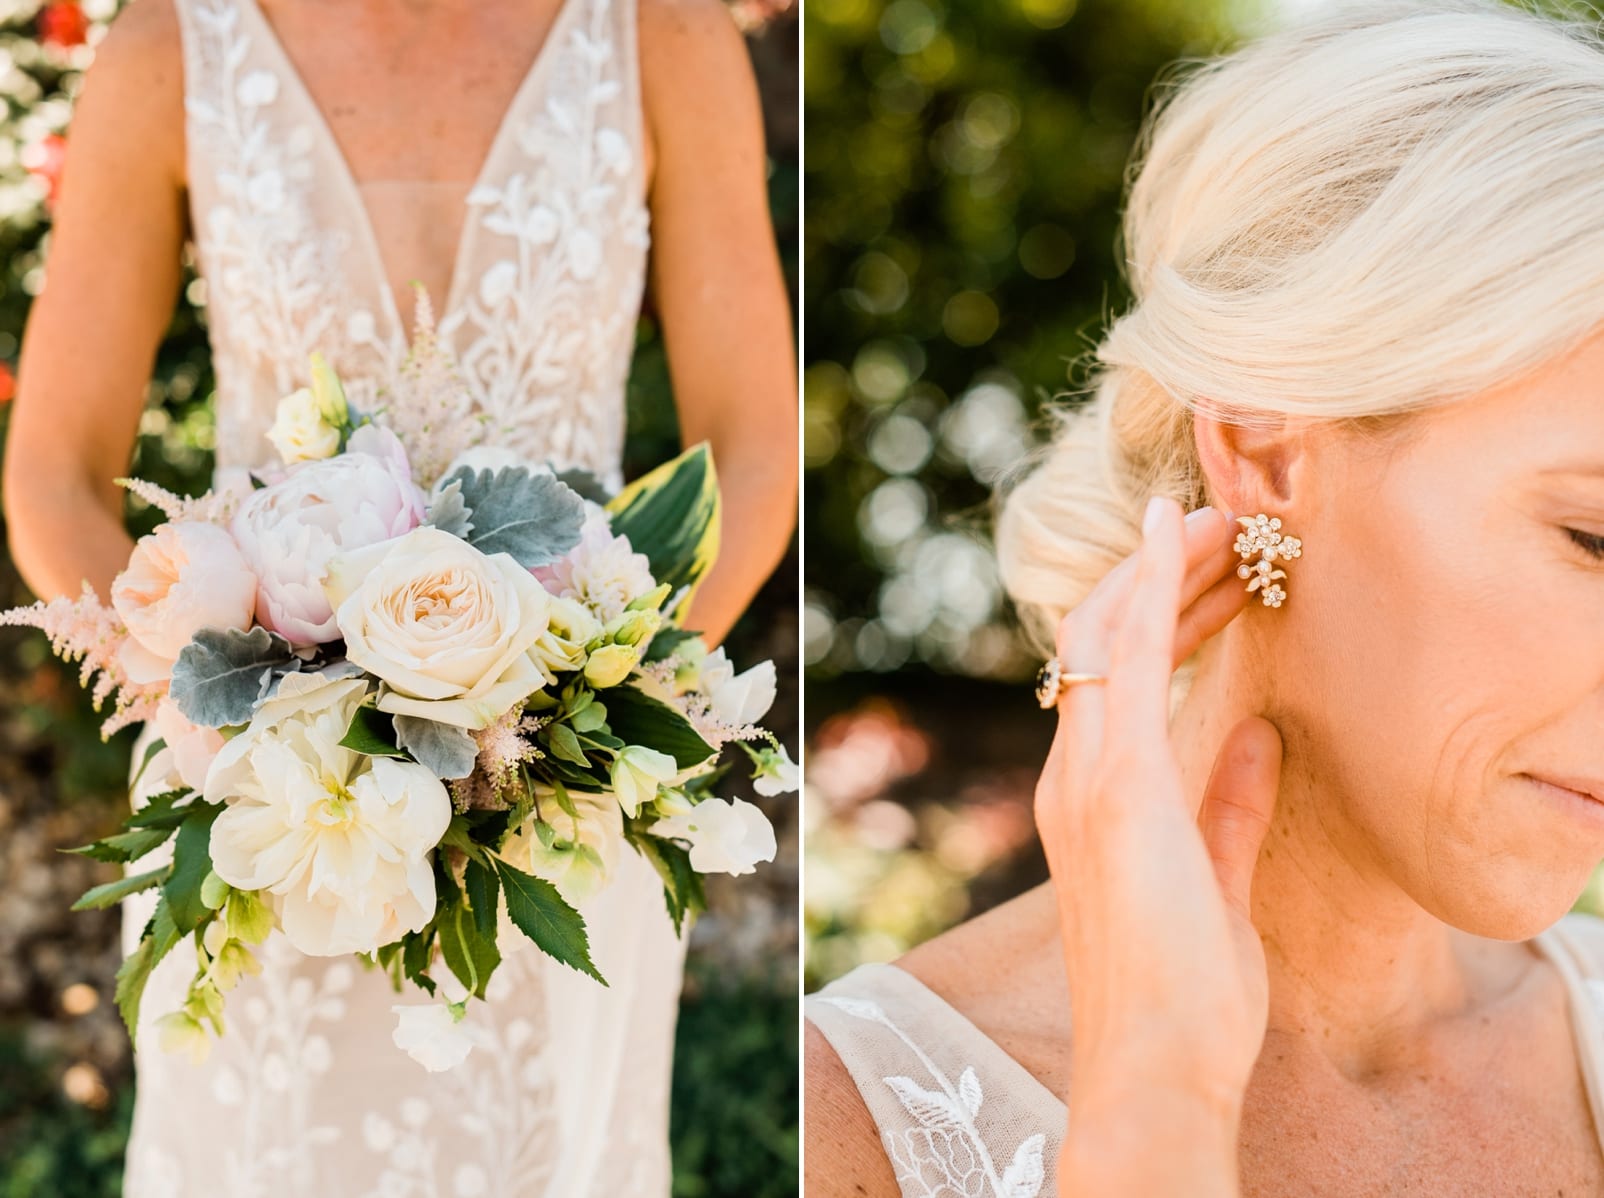 Kelly Odom Flowers bridal bouquet and bride touching the back of her ear photo